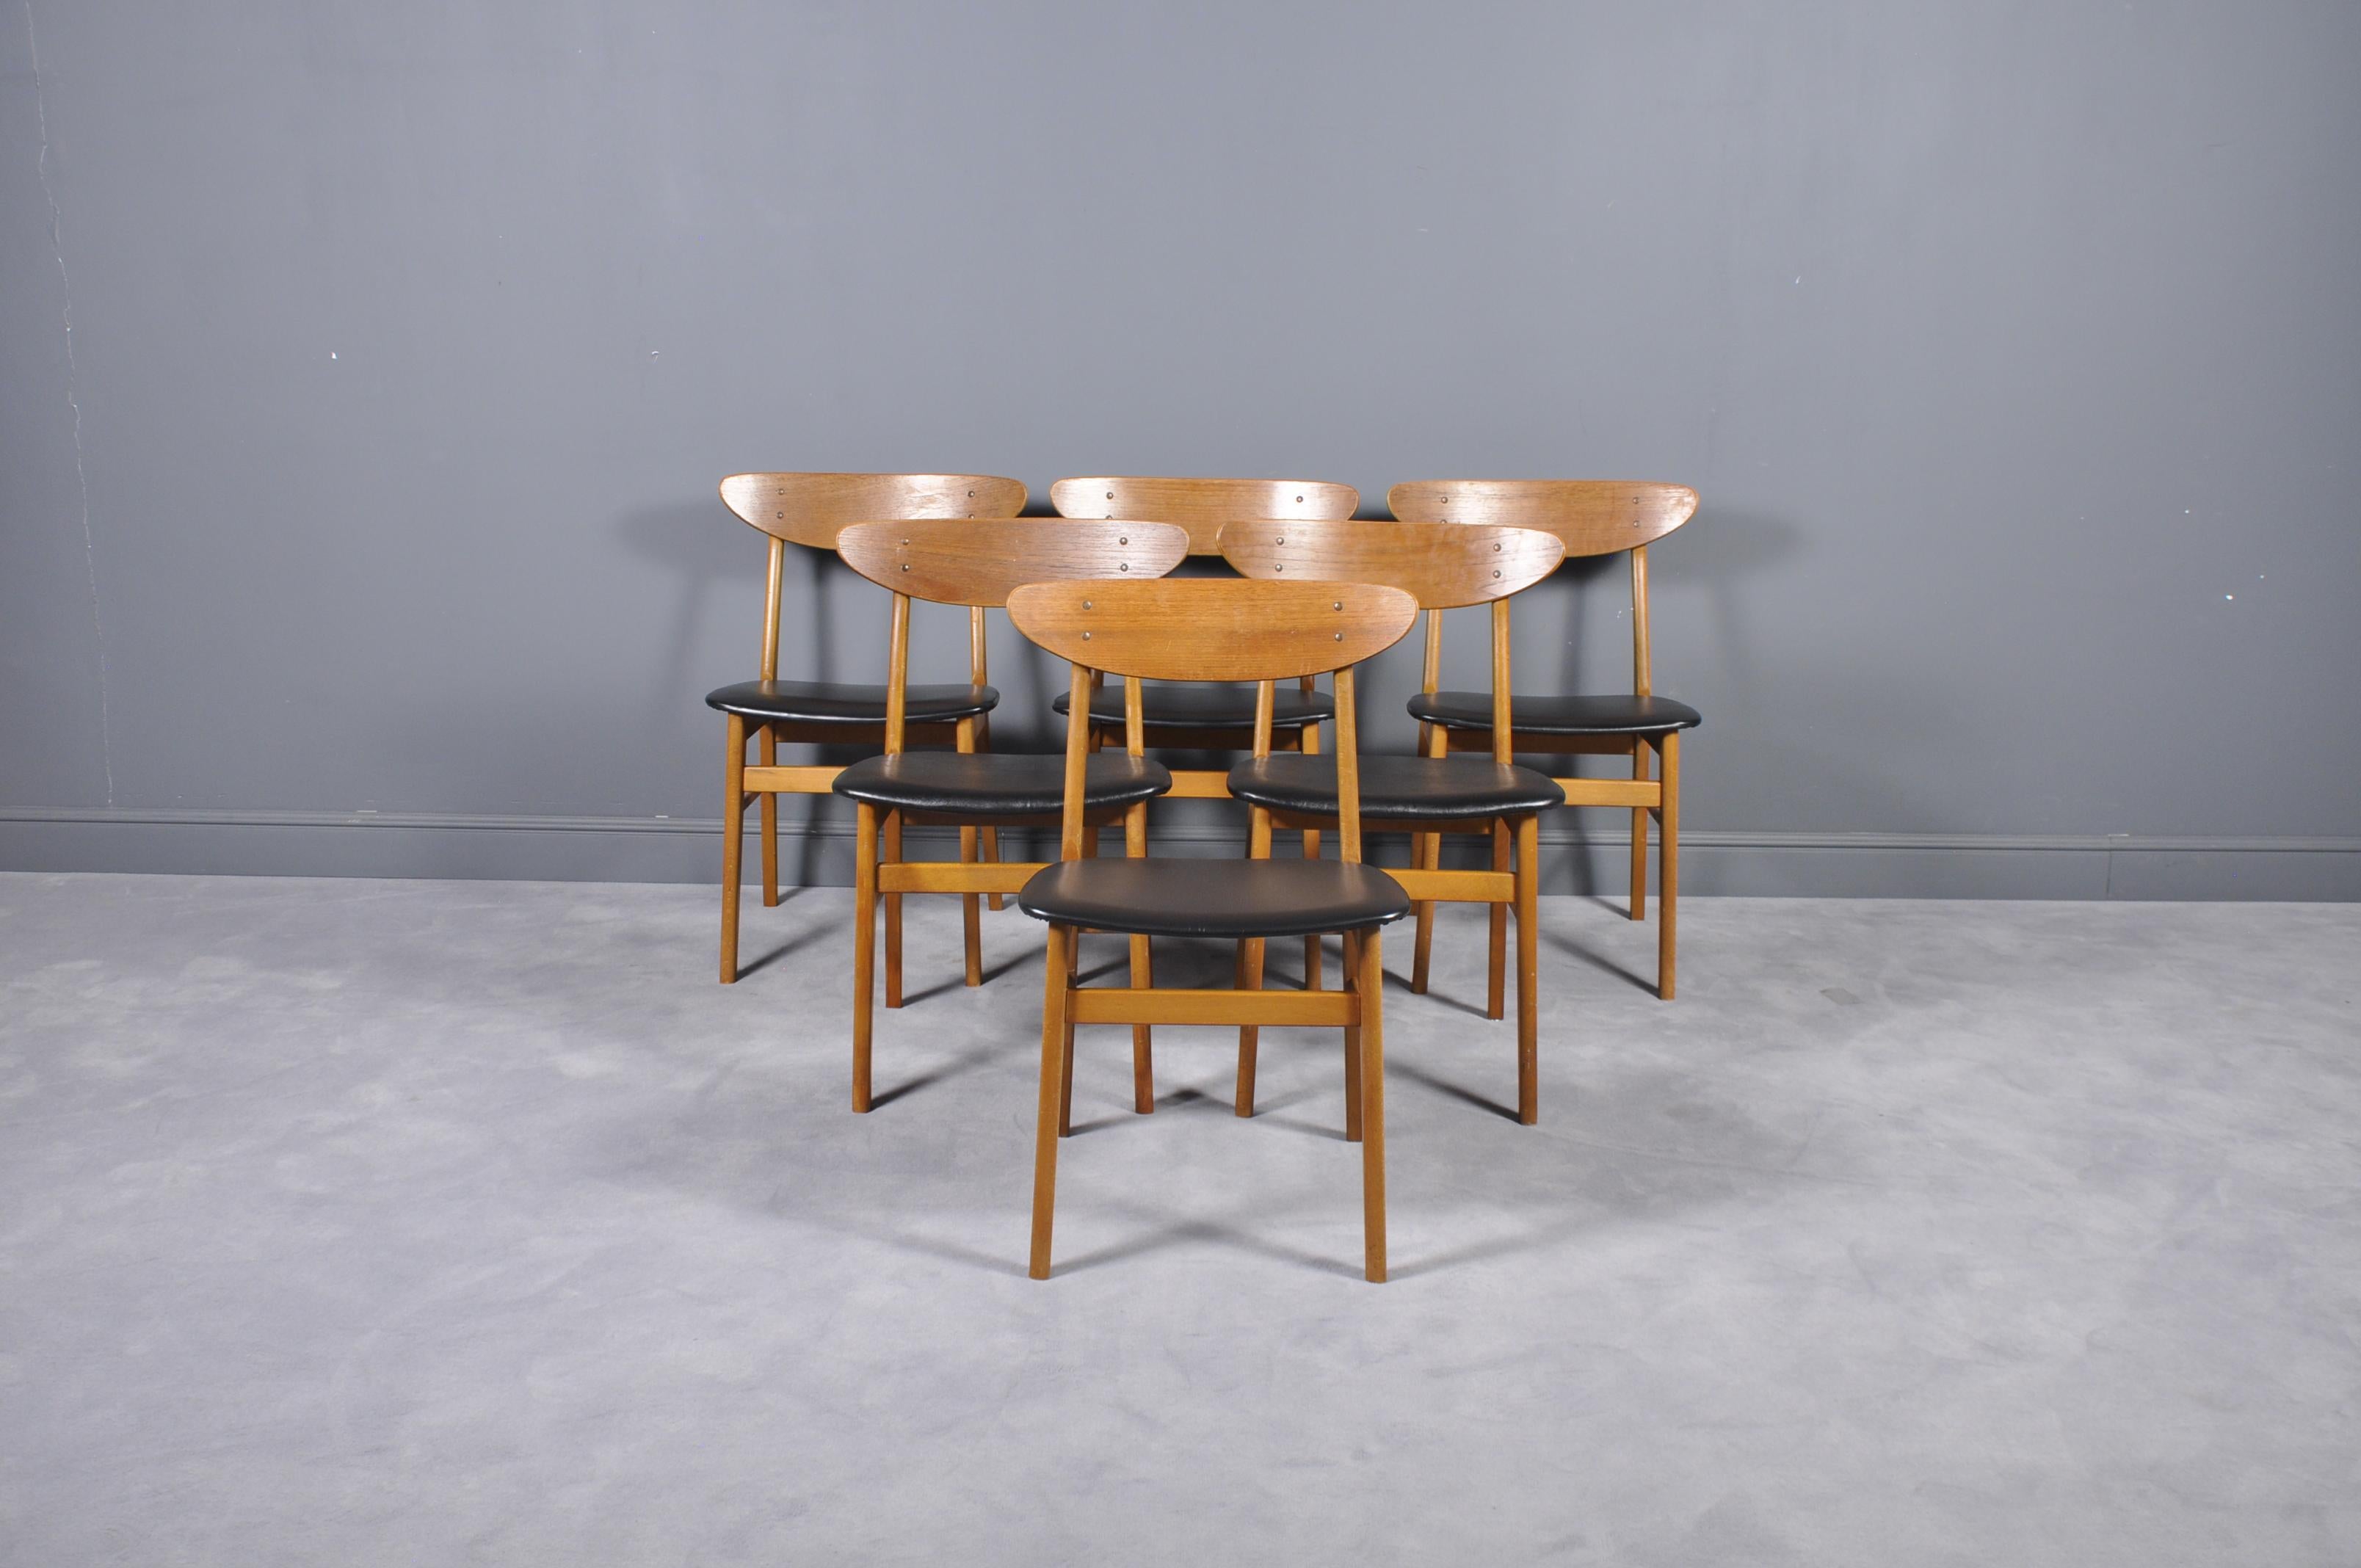 Set of six teak Danish modern dining chairs by Farstrup Møbelfabrik. With a shaped back, fine teak, solid wood beechwood seats covered with black leather.